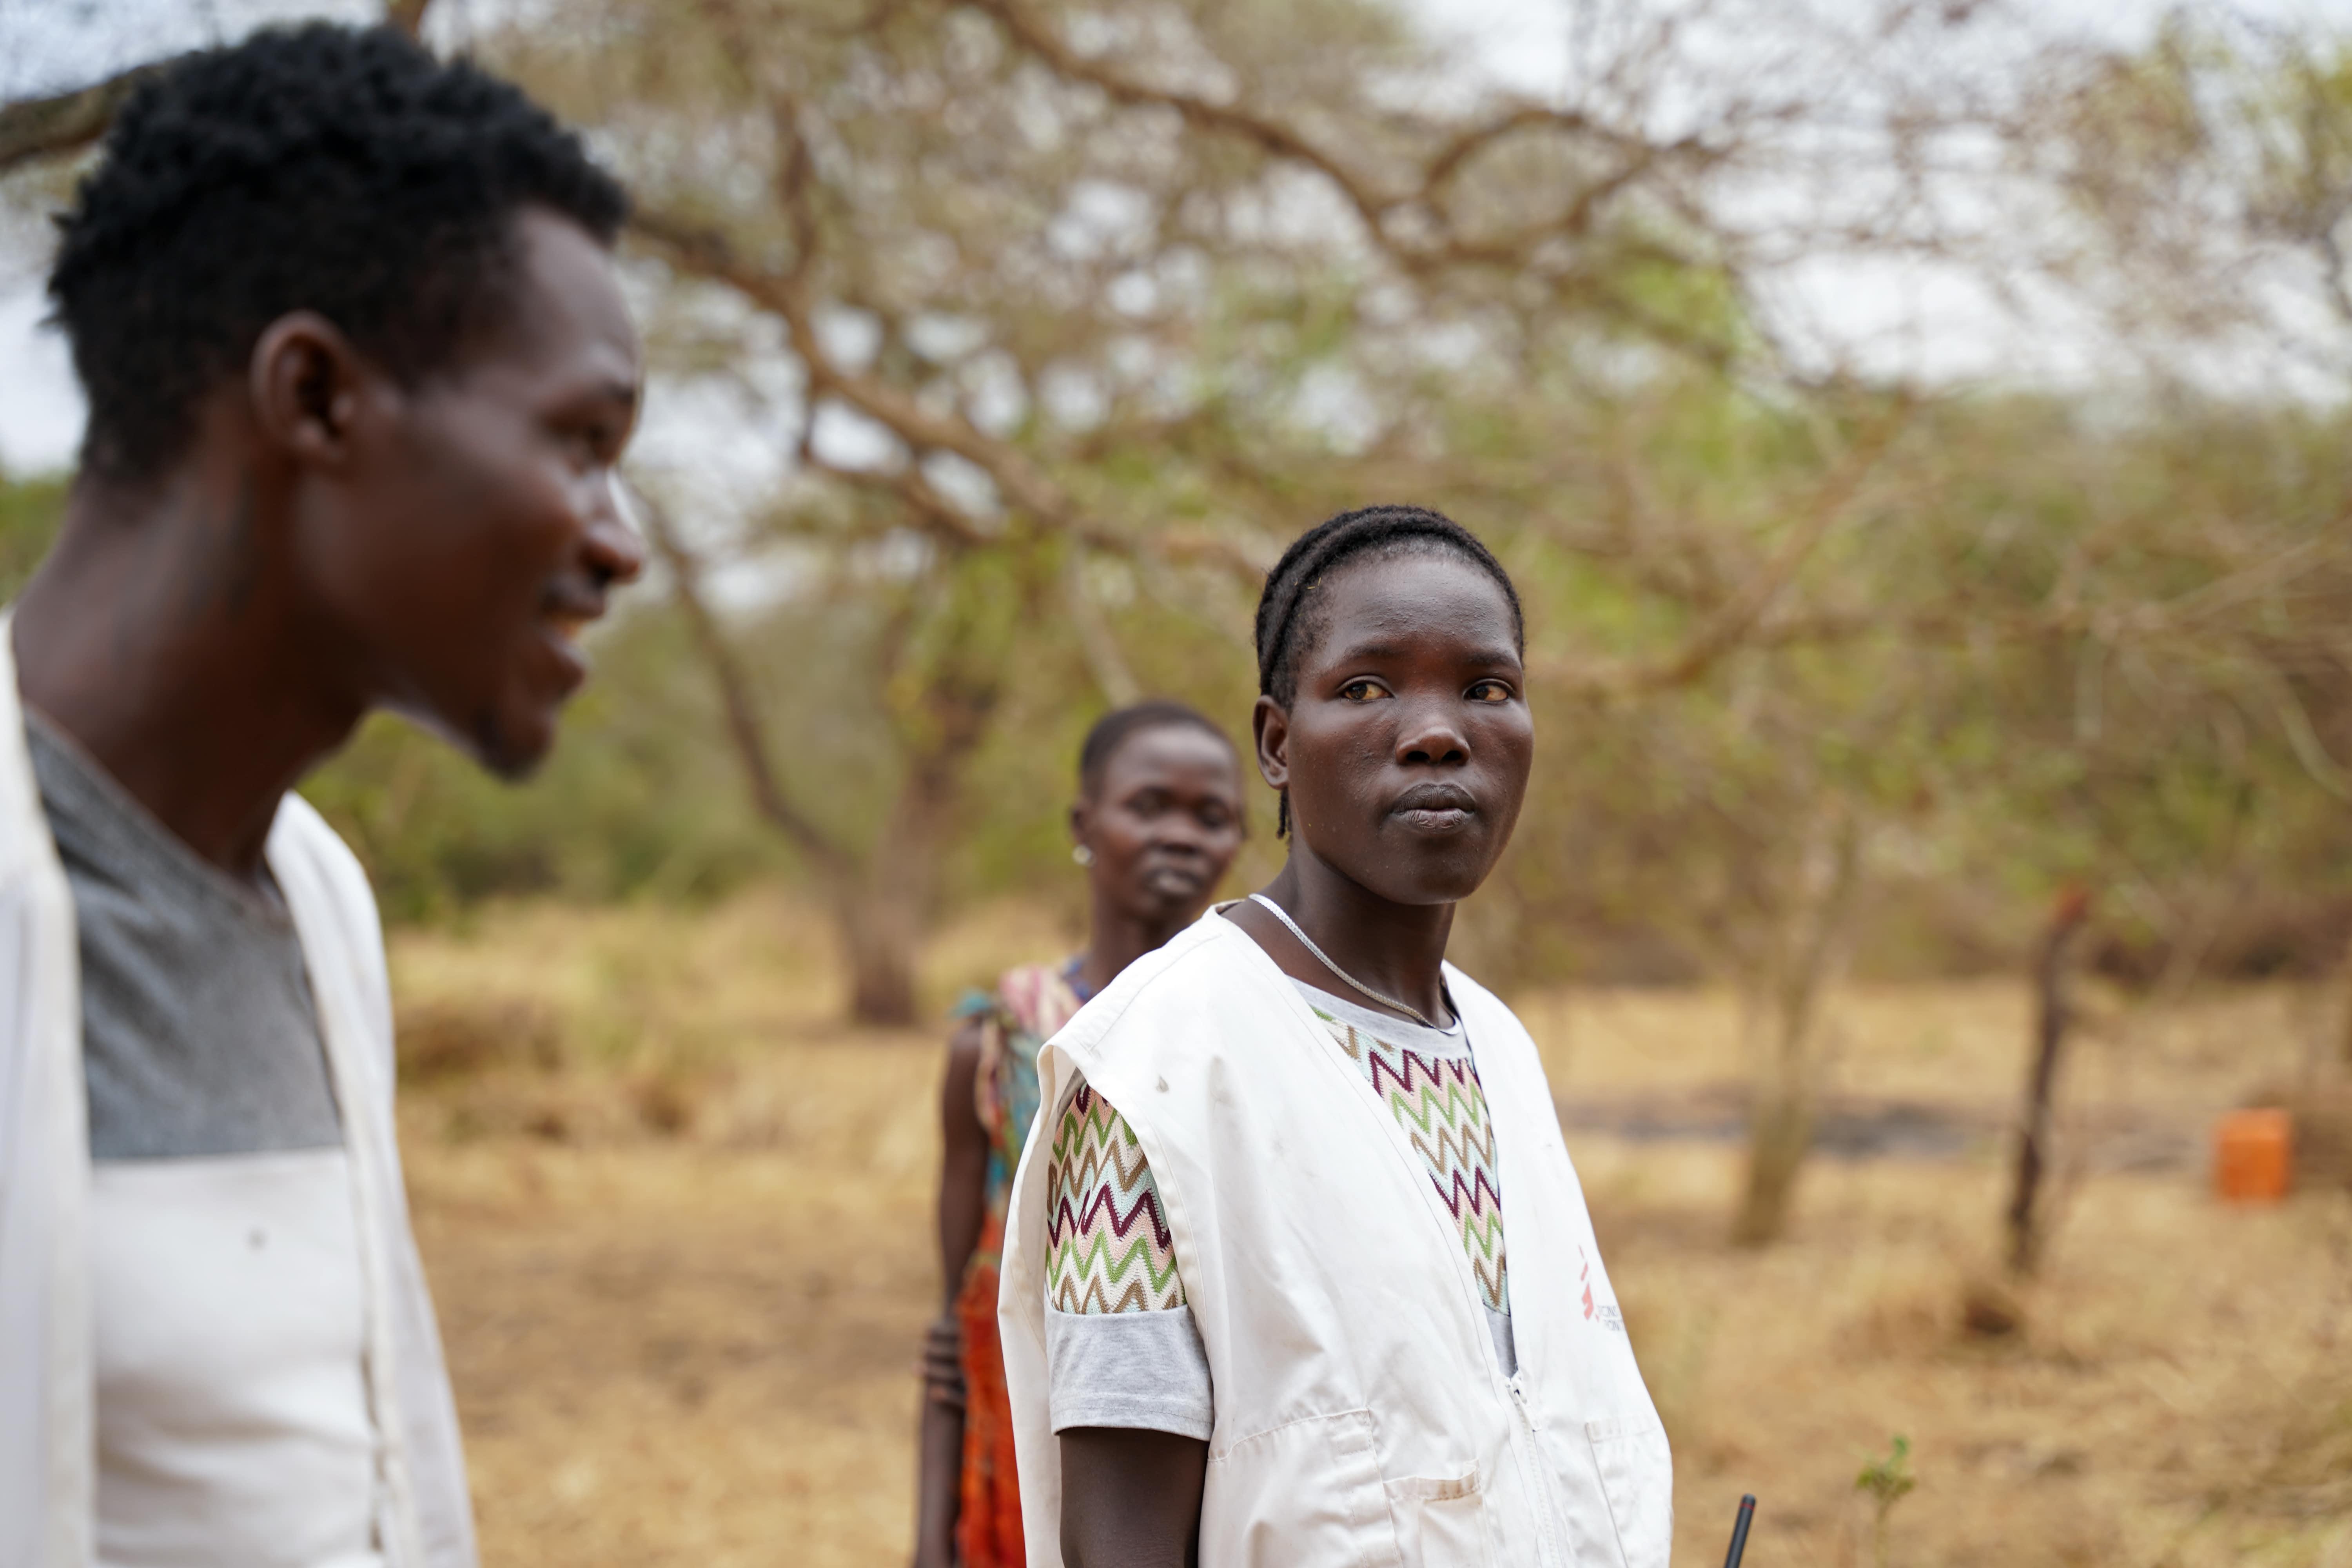 Cattle Keepers in South Sudan: Beatrice Johnson, community health educator looks at her colleague during an outreach visit to semi-nomadic communities in Labarab, Greater Pibor Administrative Area.